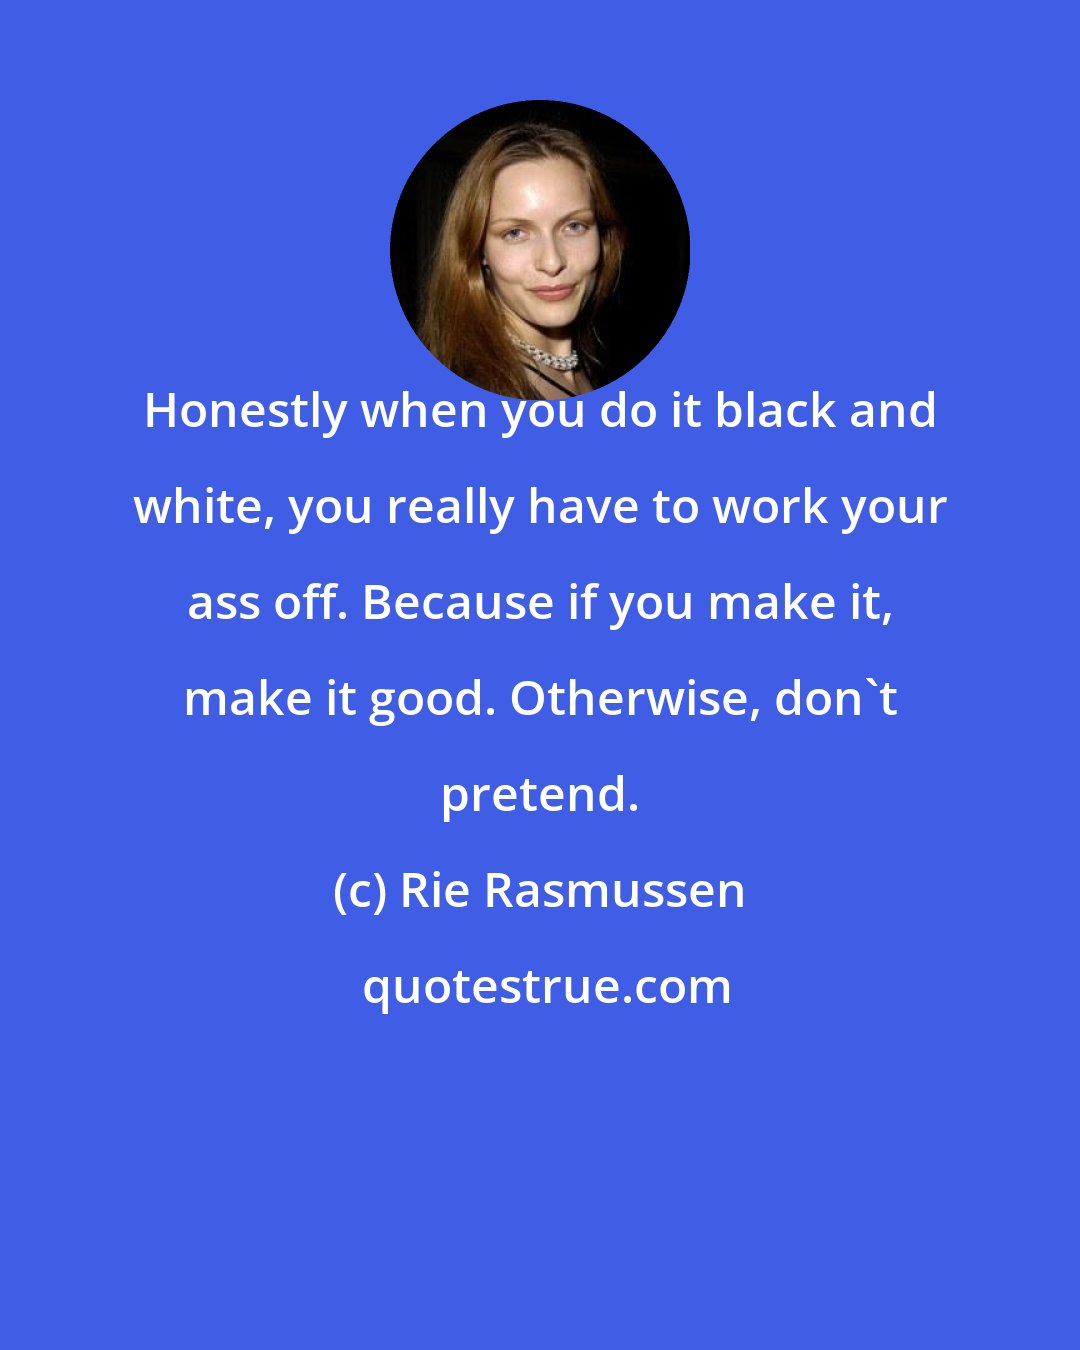 Rie Rasmussen: Honestly when you do it black and white, you really have to work your ass off. Because if you make it, make it good. Otherwise, don't pretend.